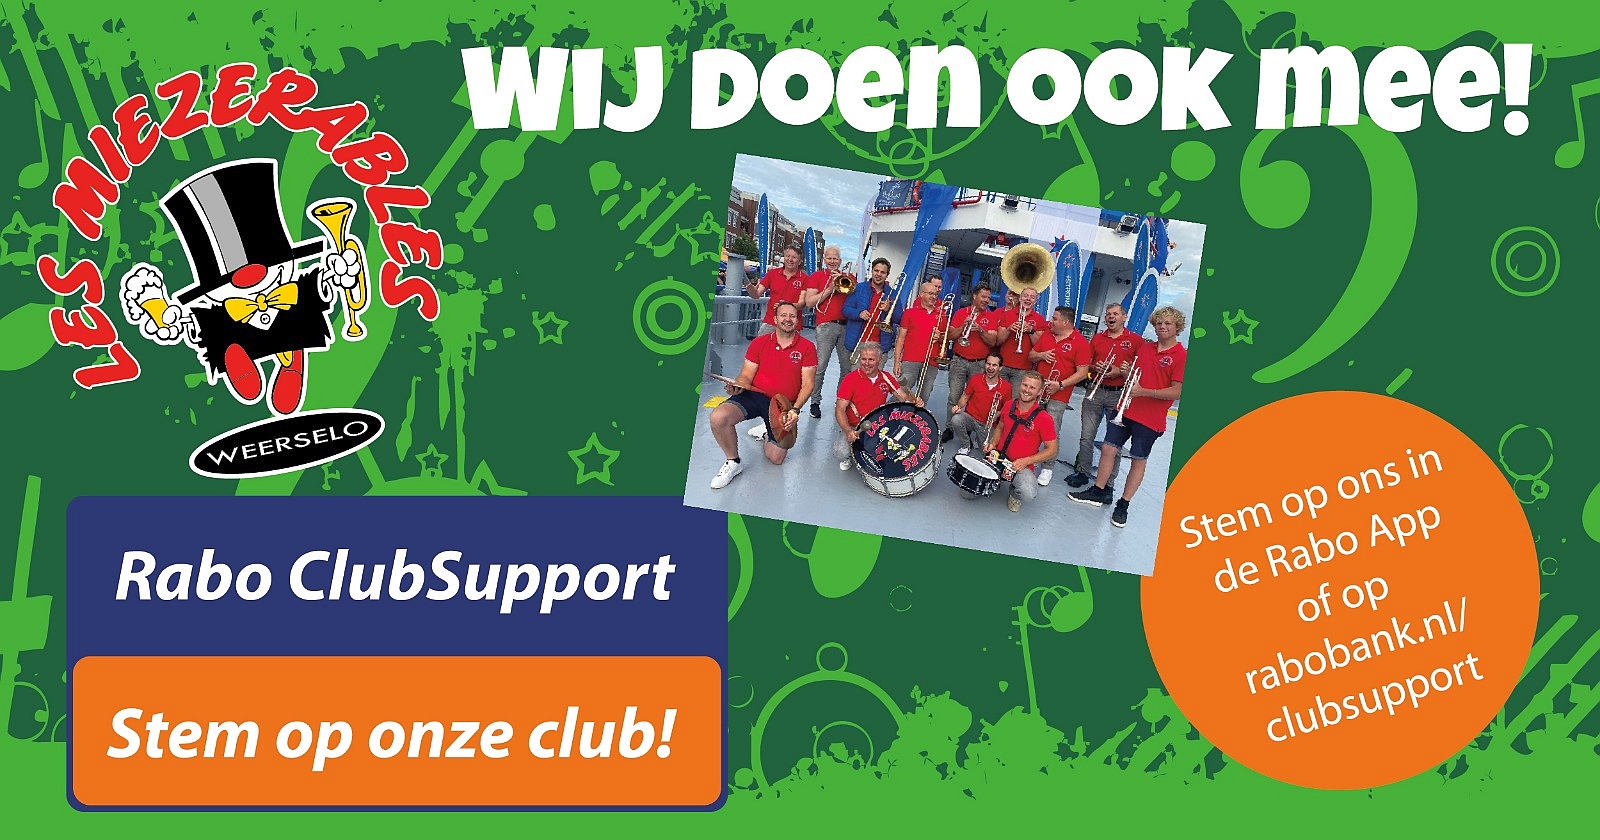 Rabo Clubsupport Les Miezerables Weerselo